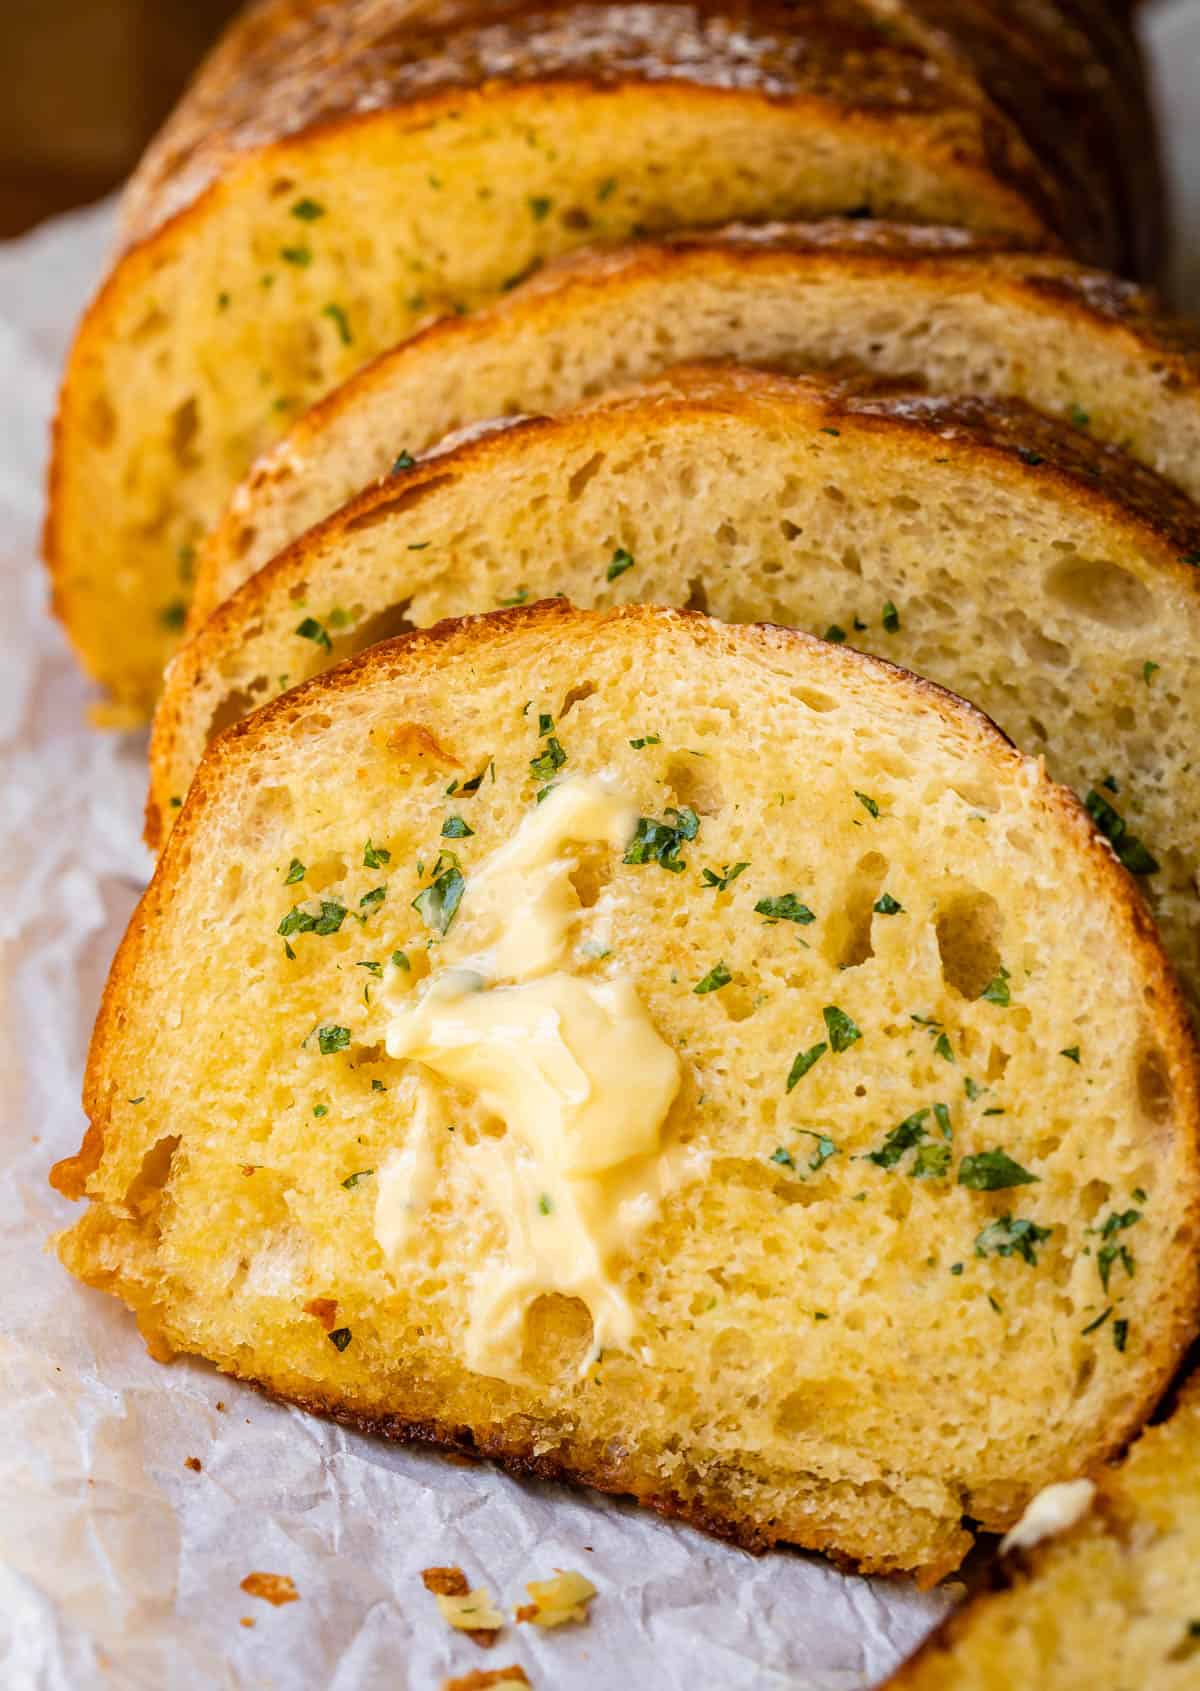 several slices of baked garlic bread with melty butter, garlic, and parsley.